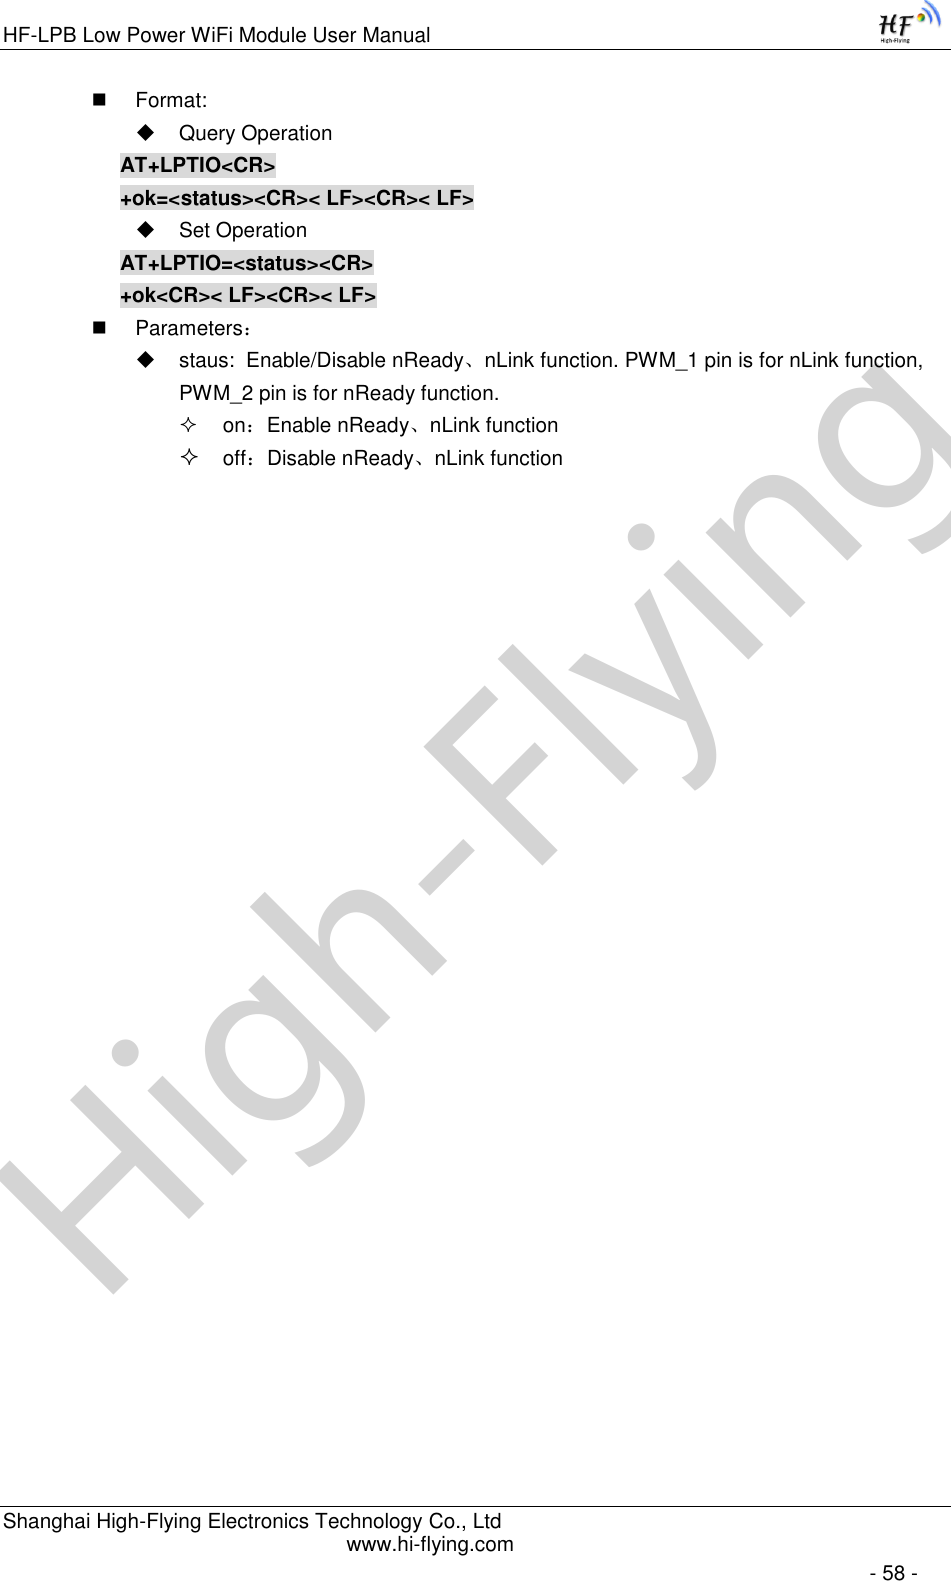 High-FlyingHF-LPB Low Power WiFi Module User Manual Shanghai High-Flying Electronics Technology Co., Ltd www.hi-flying.com   - 58 -  Format:  Query Operation AT+LPTIO&lt;CR&gt; +ok=&lt;status&gt;&lt;CR&gt;&lt; LF&gt;&lt;CR&gt;&lt; LF&gt;  Set Operation AT+LPTIO=&lt;status&gt;&lt;CR&gt; +ok&lt;CR&gt;&lt; LF&gt;&lt;CR&gt;&lt; LF&gt;  Parameters：   staus:  Enable/Disable nReady、nLink function. PWM_1 pin is for nLink function, PWM_2 pin is for nReady function.  on：Enable nReady、nLink function  off：Disable nReady、nLink function  